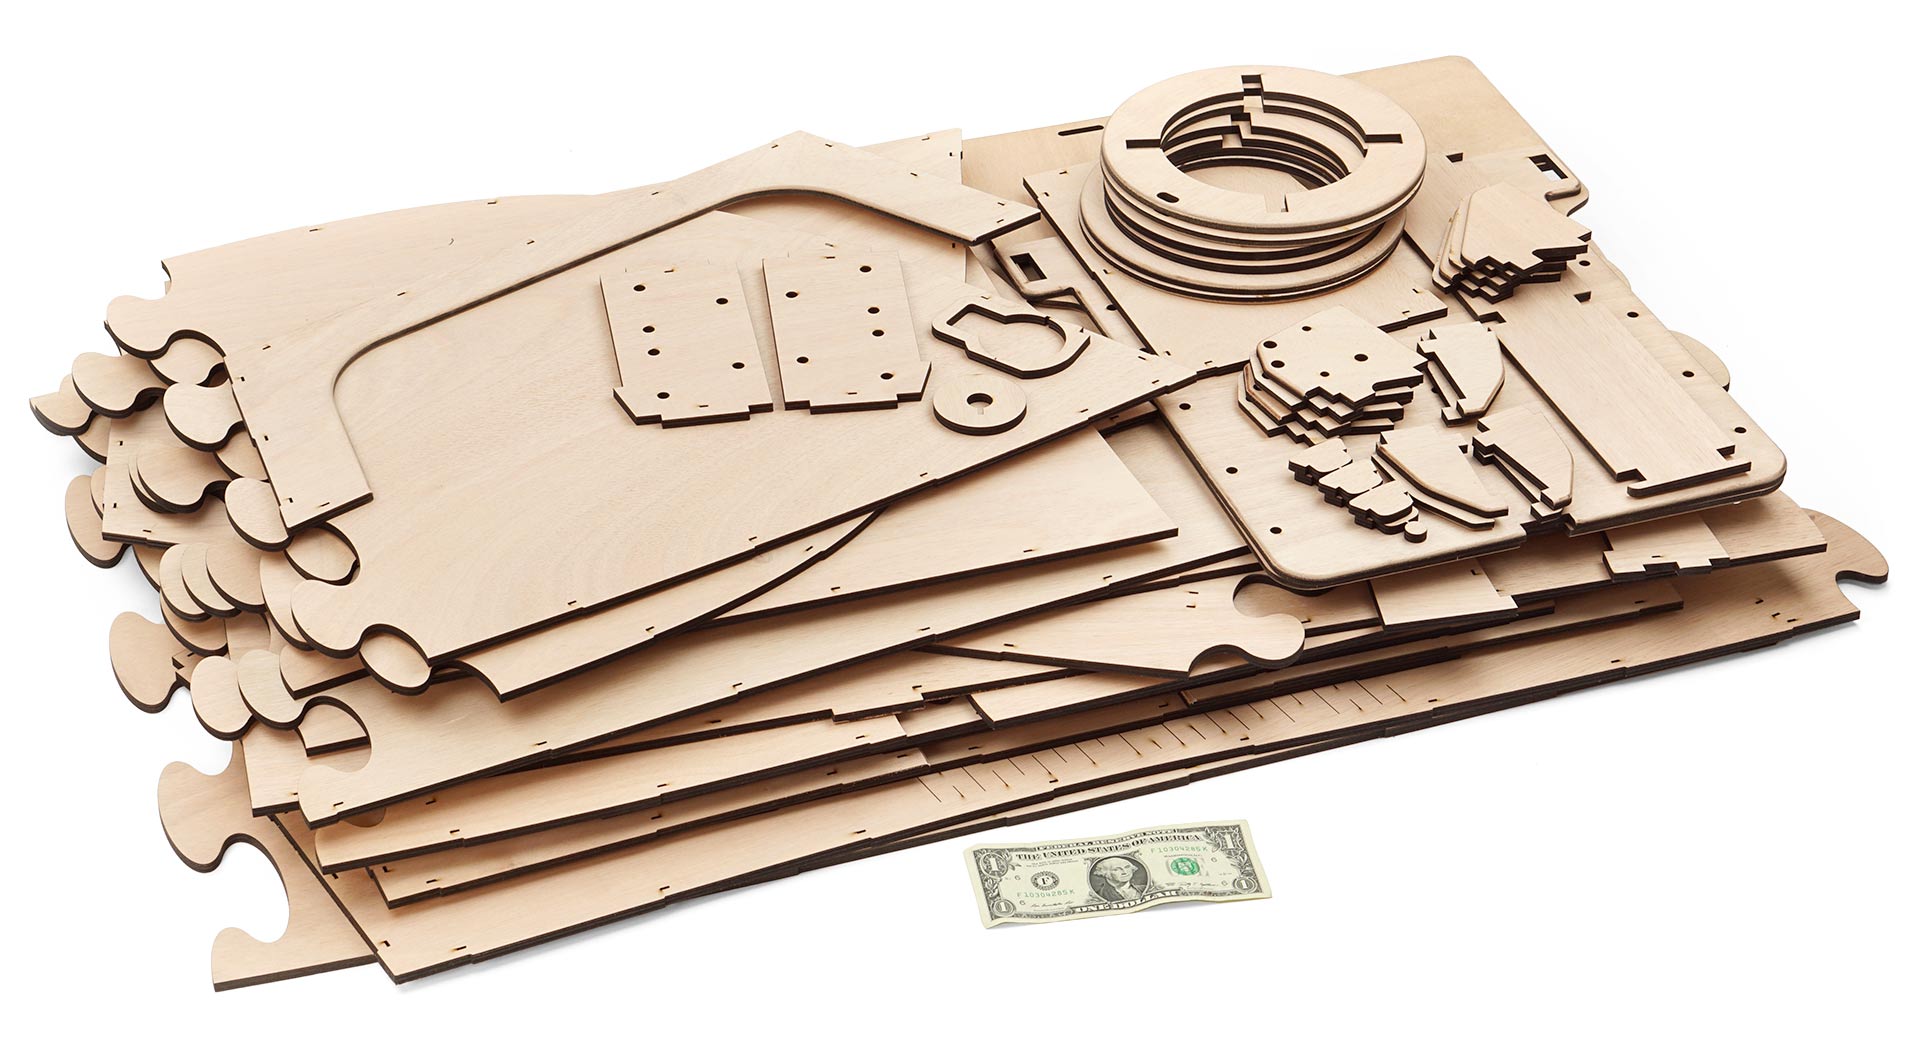 A laser cut stack of marine grade plywood